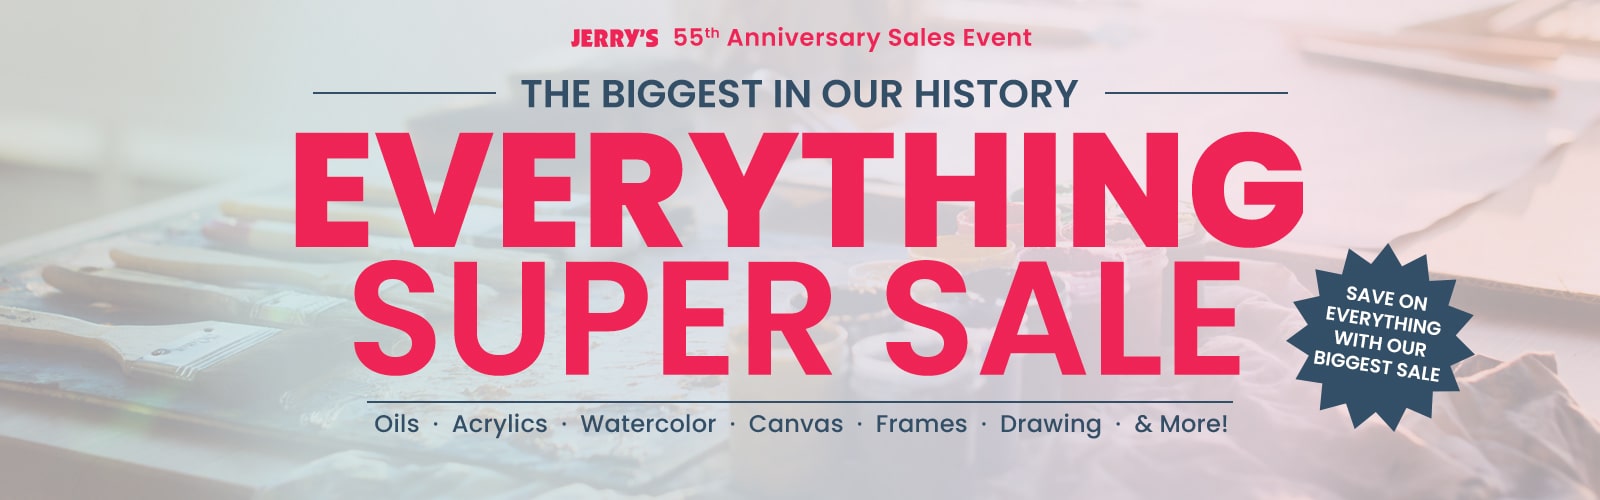 Jerry's 55th Anniversary Everything Super Sale